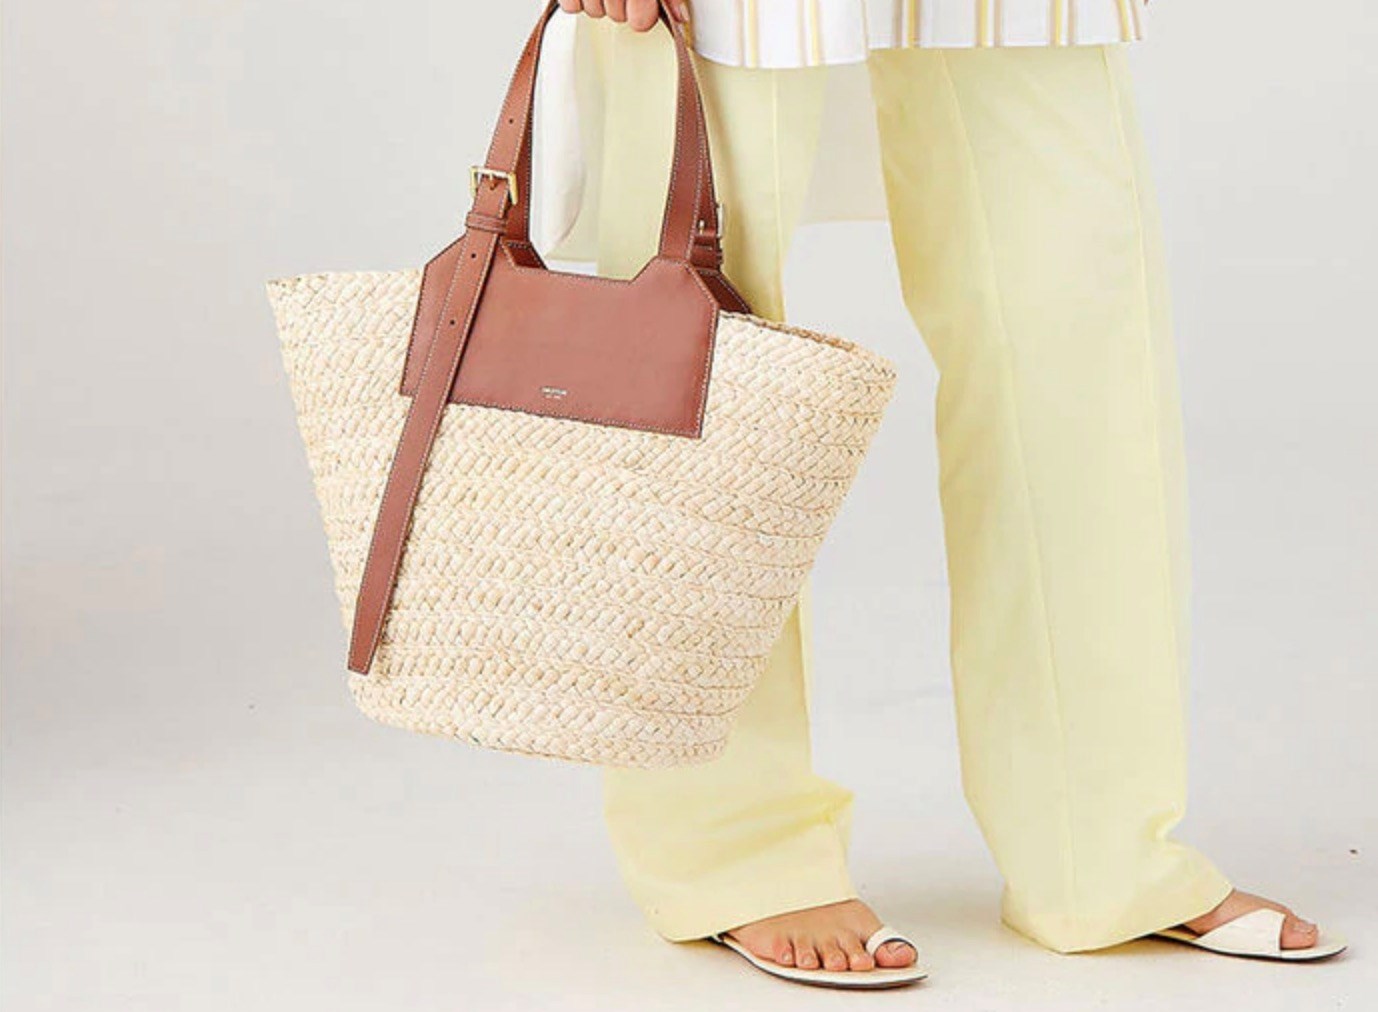 A woven raffia tote gives of classic summer vibes, but you can also go for other totes if you want a less seasonal look.